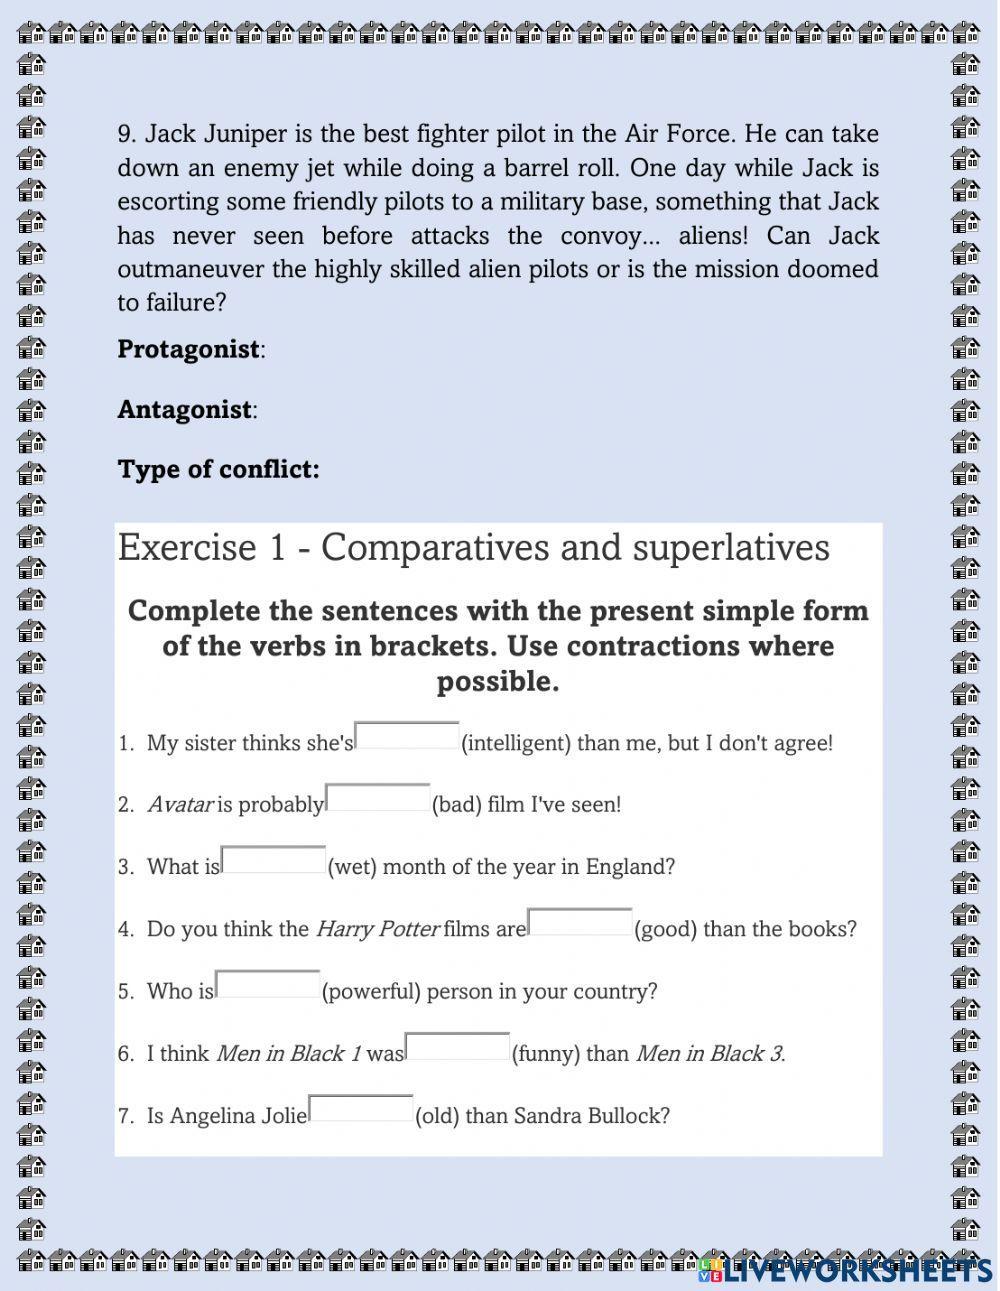 ELA Reading- Comparatives and superlatives- Conflict among characters